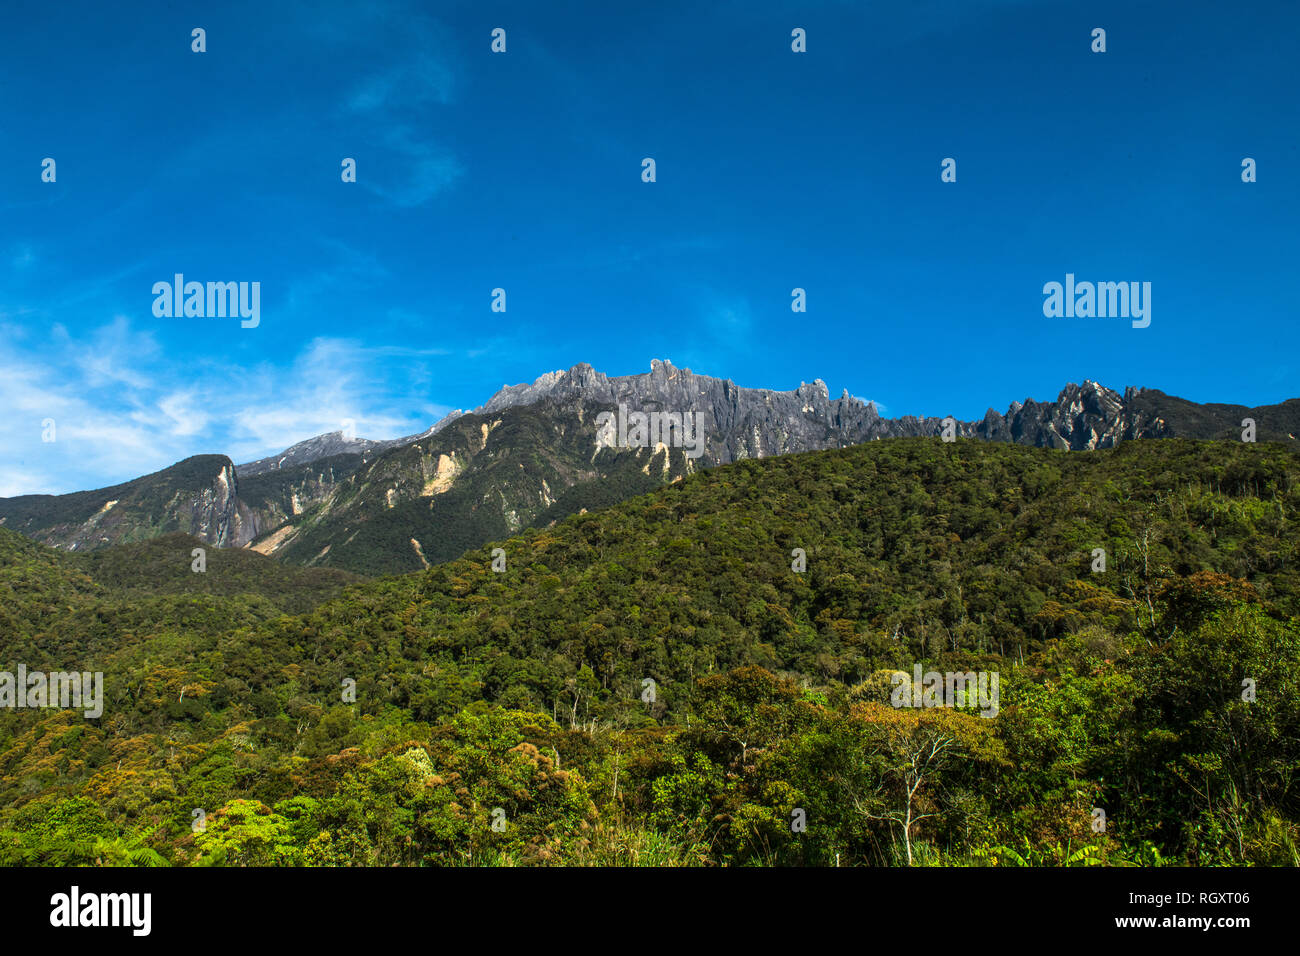 Mount Kinabalu summit and peaks in sunrise light, viewed from Mesilau, Sabah, Borneo, Malaysia, with forest slopes in the foreground. Stock Photo